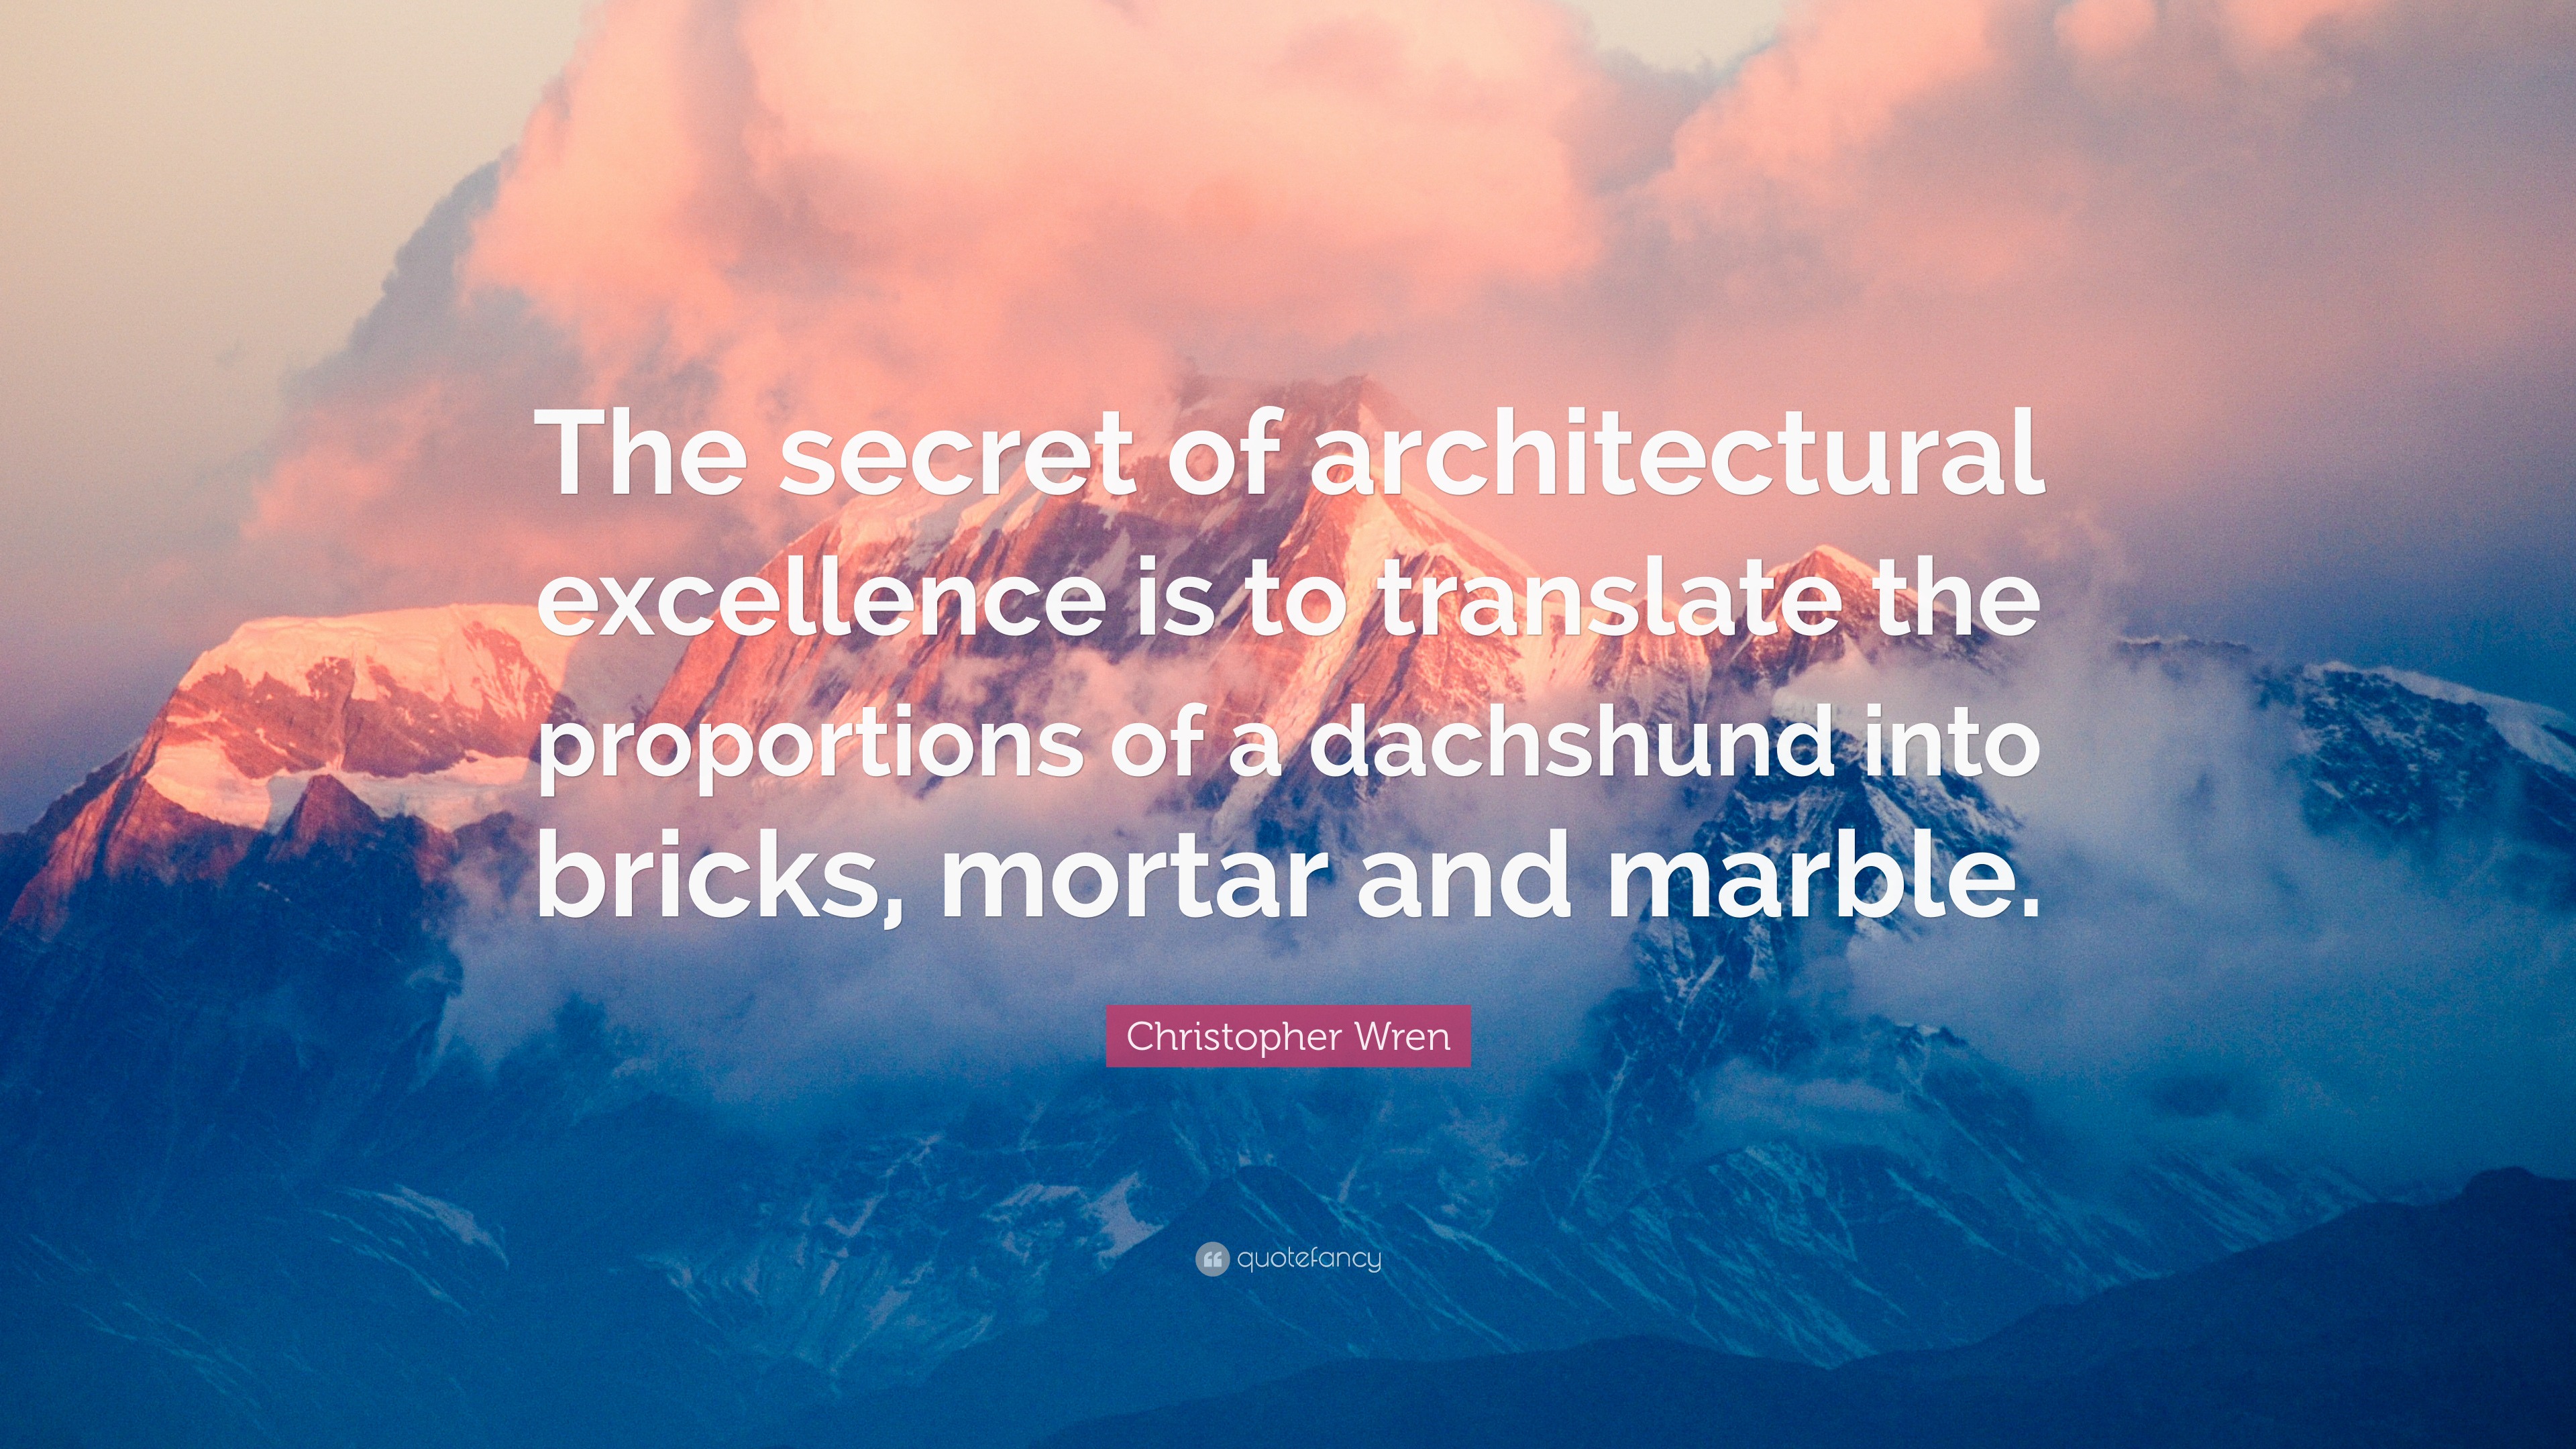 Christopher Wren Quote: “The secret of architectural excellence is to ...